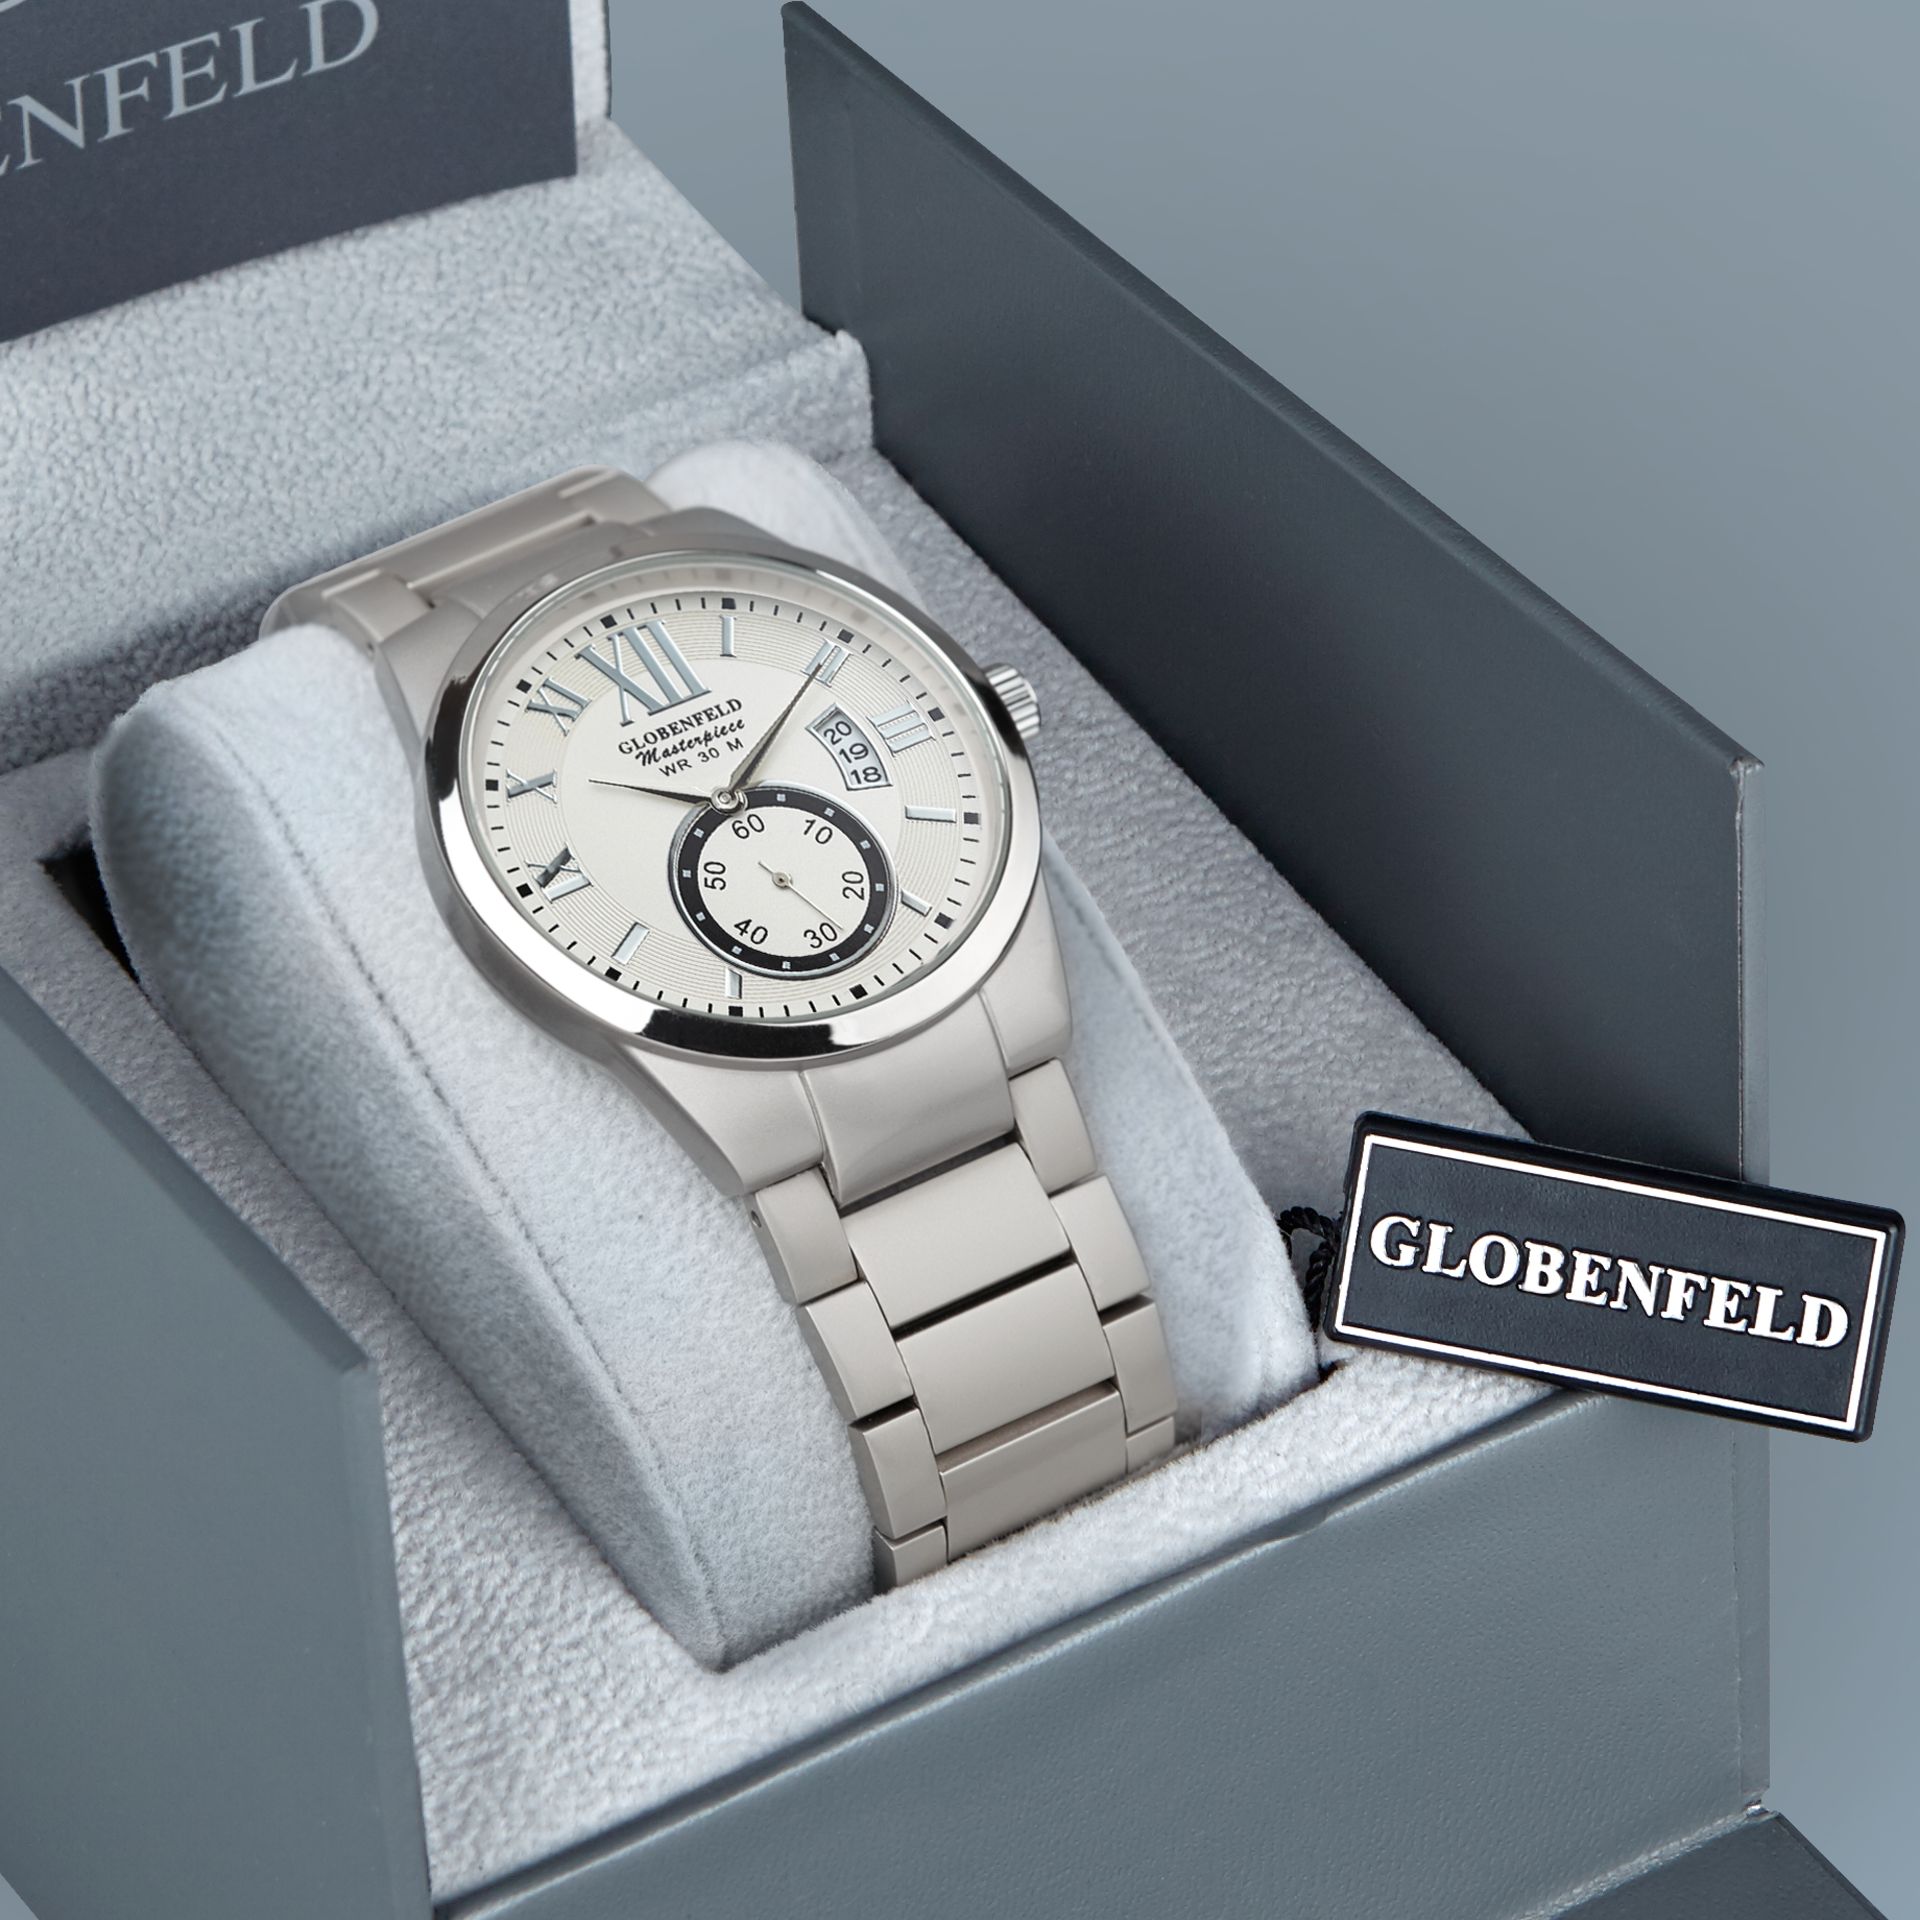 V Brand New Gents Globenfeld White Masterpiece Watch With Box & Papers RRP440.00